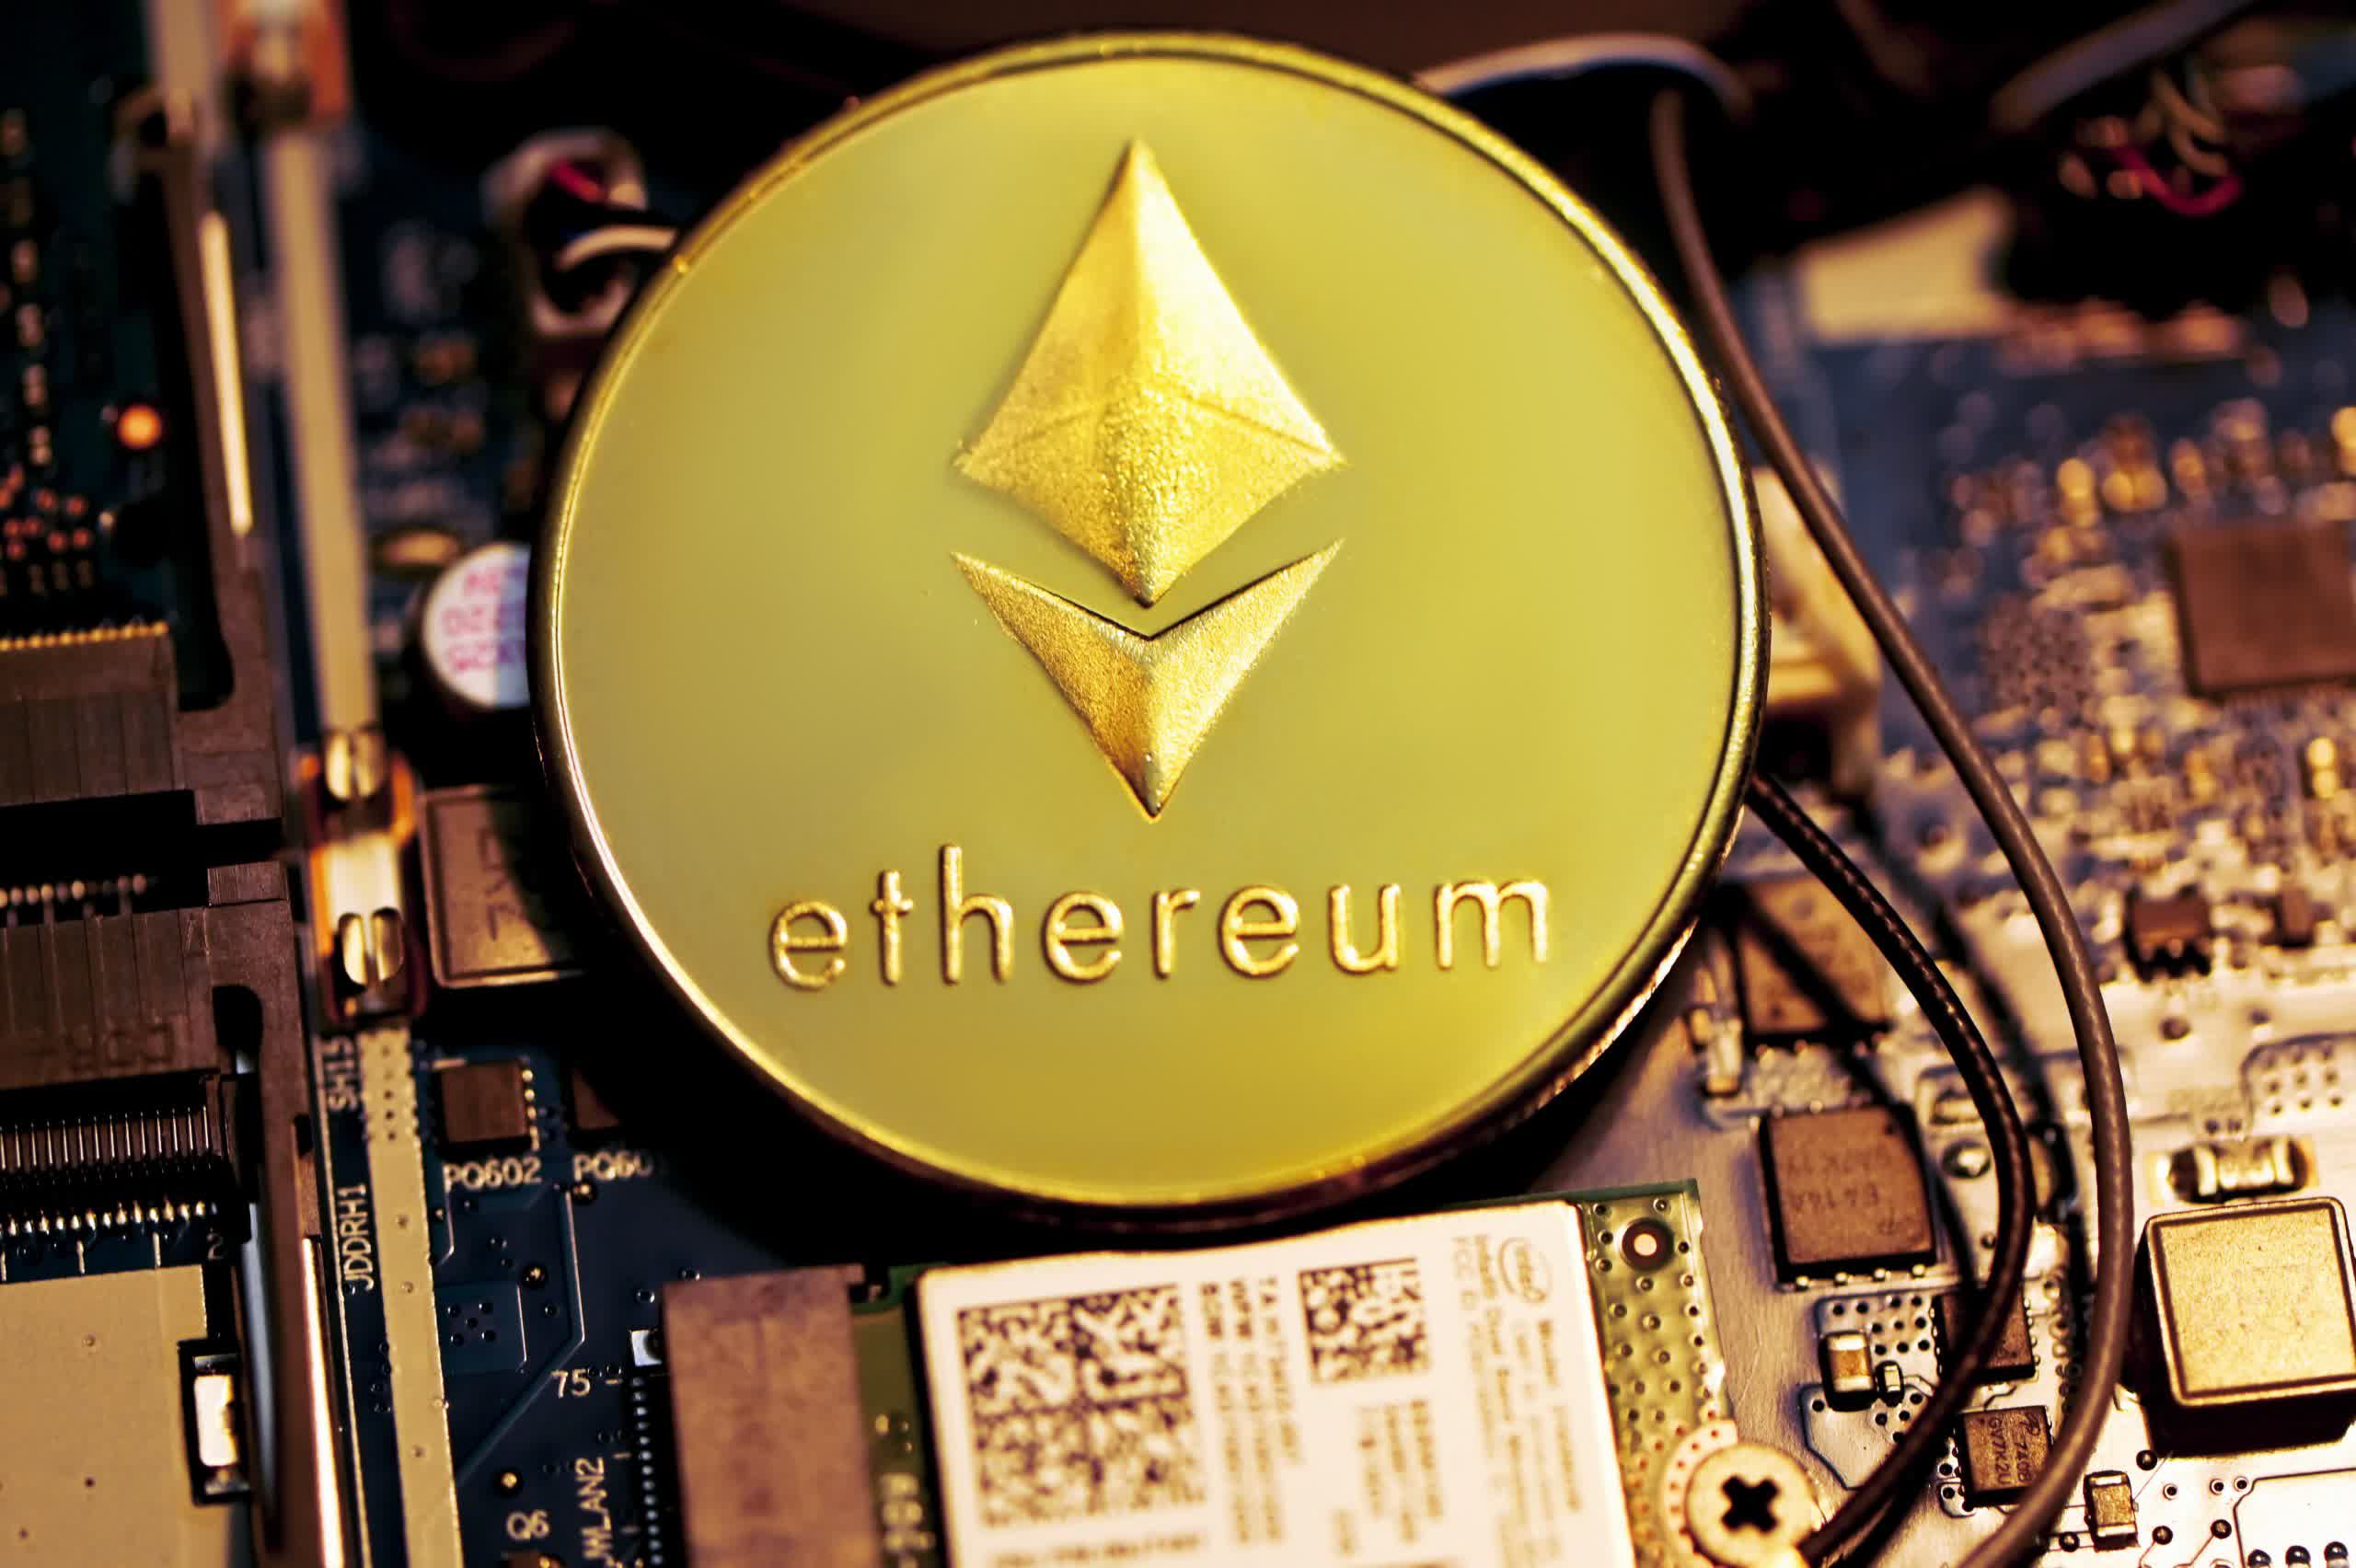 Ethereum finally switches to proof-of-stake, ending GPU mining thumbnail